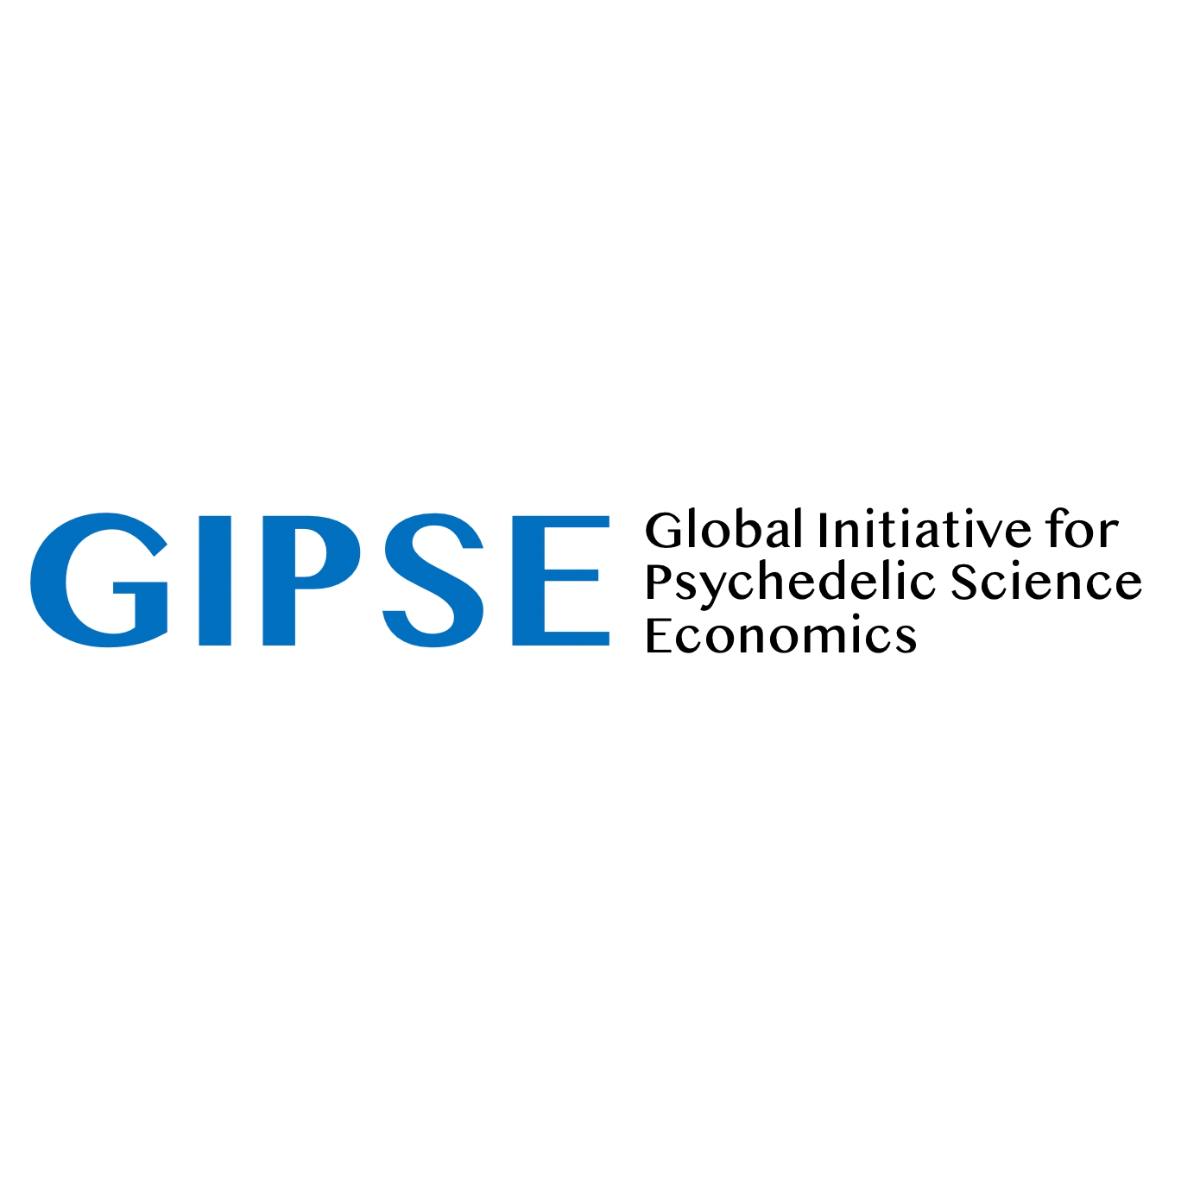 text of "Global Initiative for Psychedelic Science Economics"